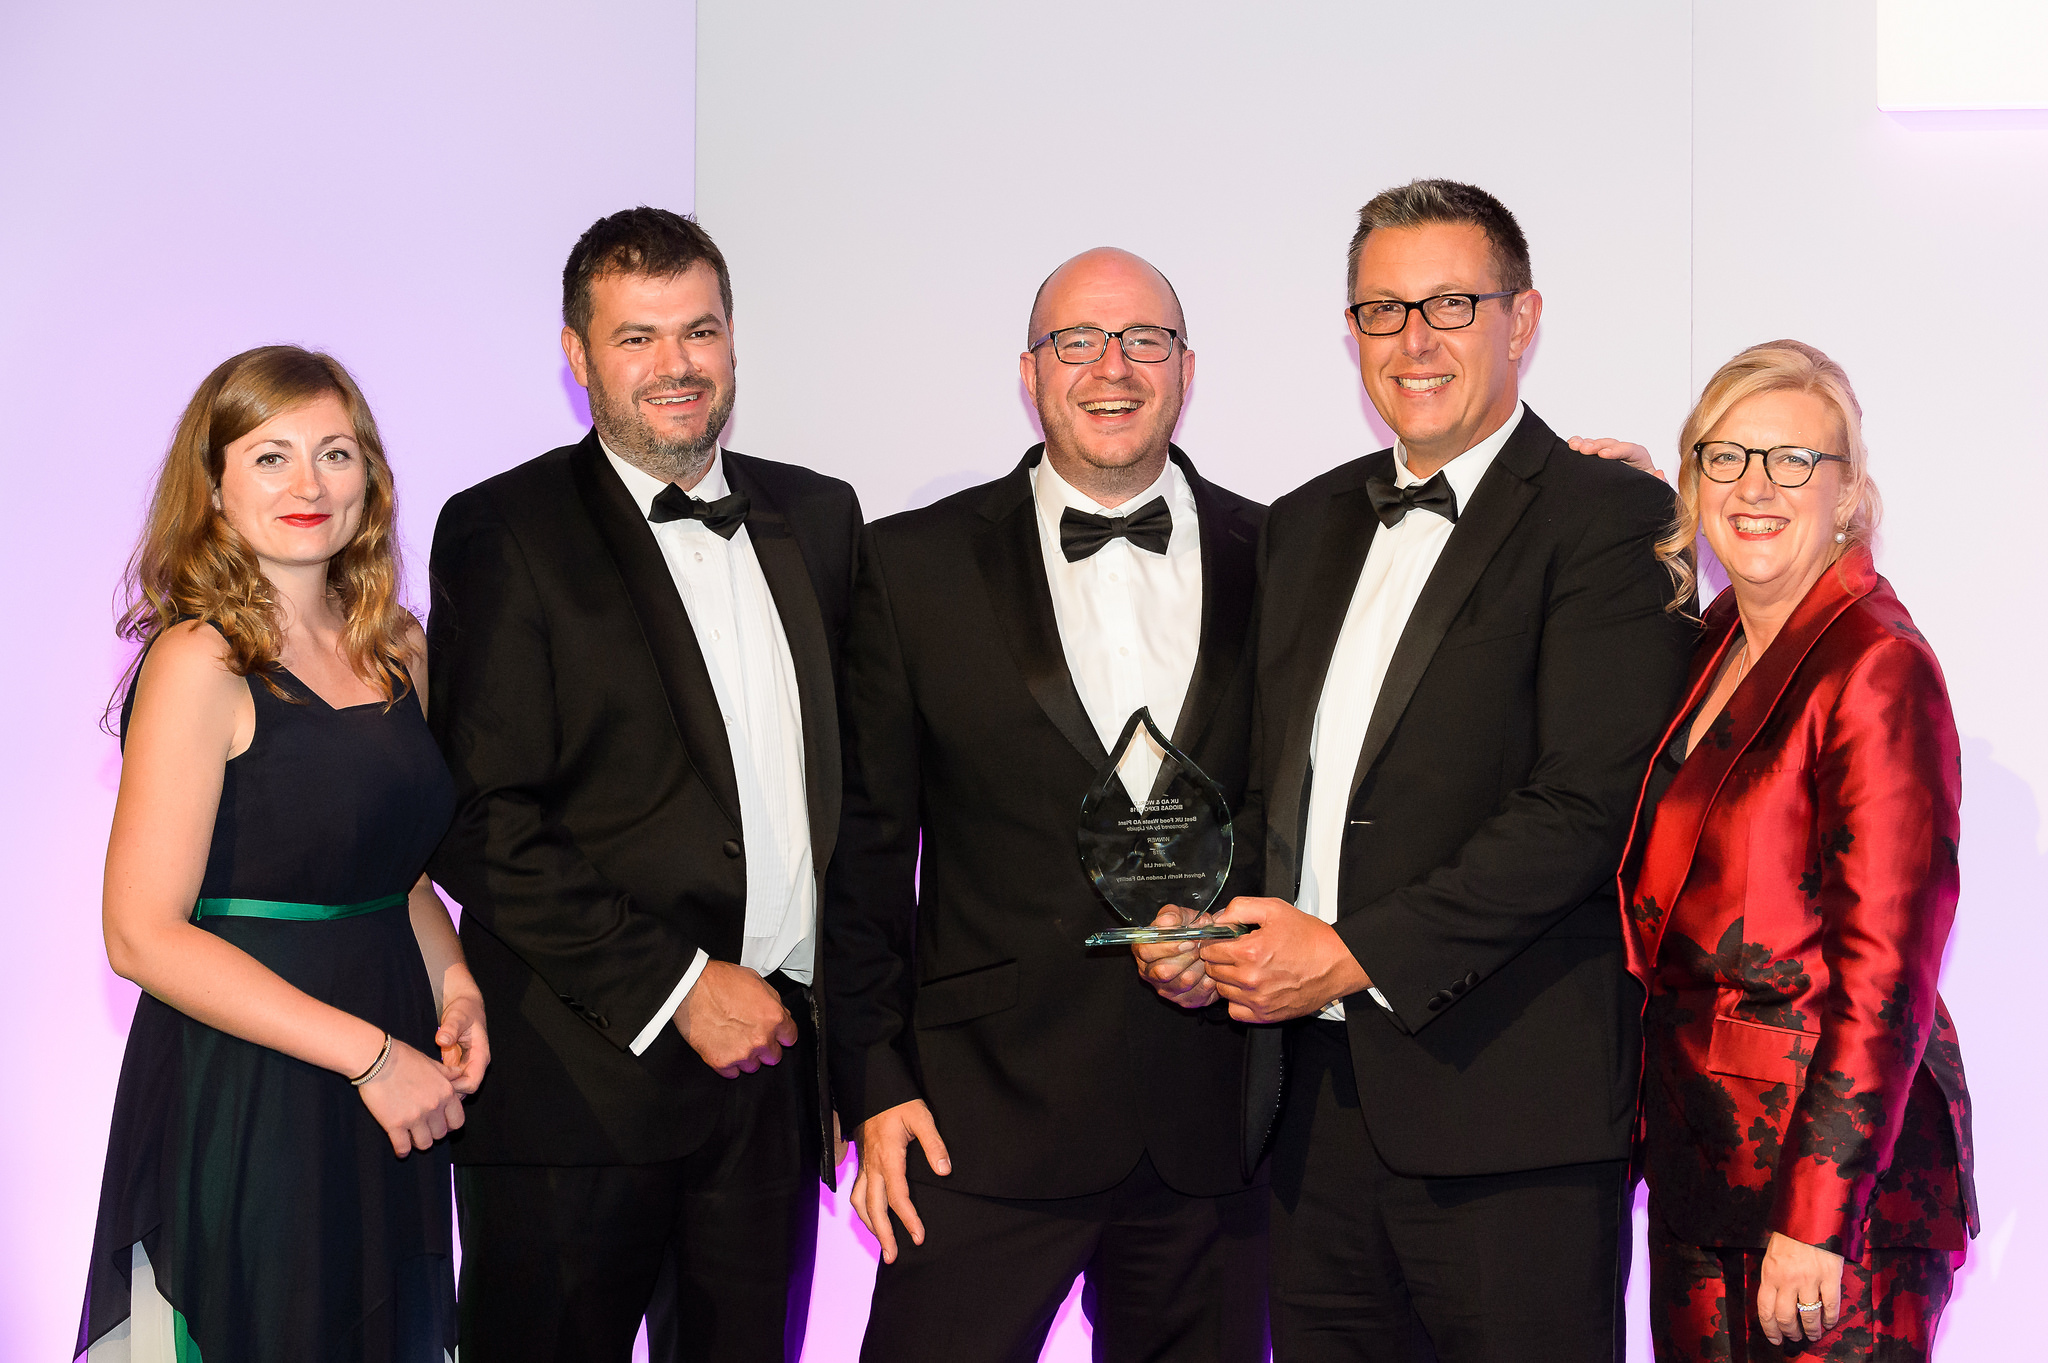 John Parkin & Chris Woolcock collect award for AD Plant of the year 2018